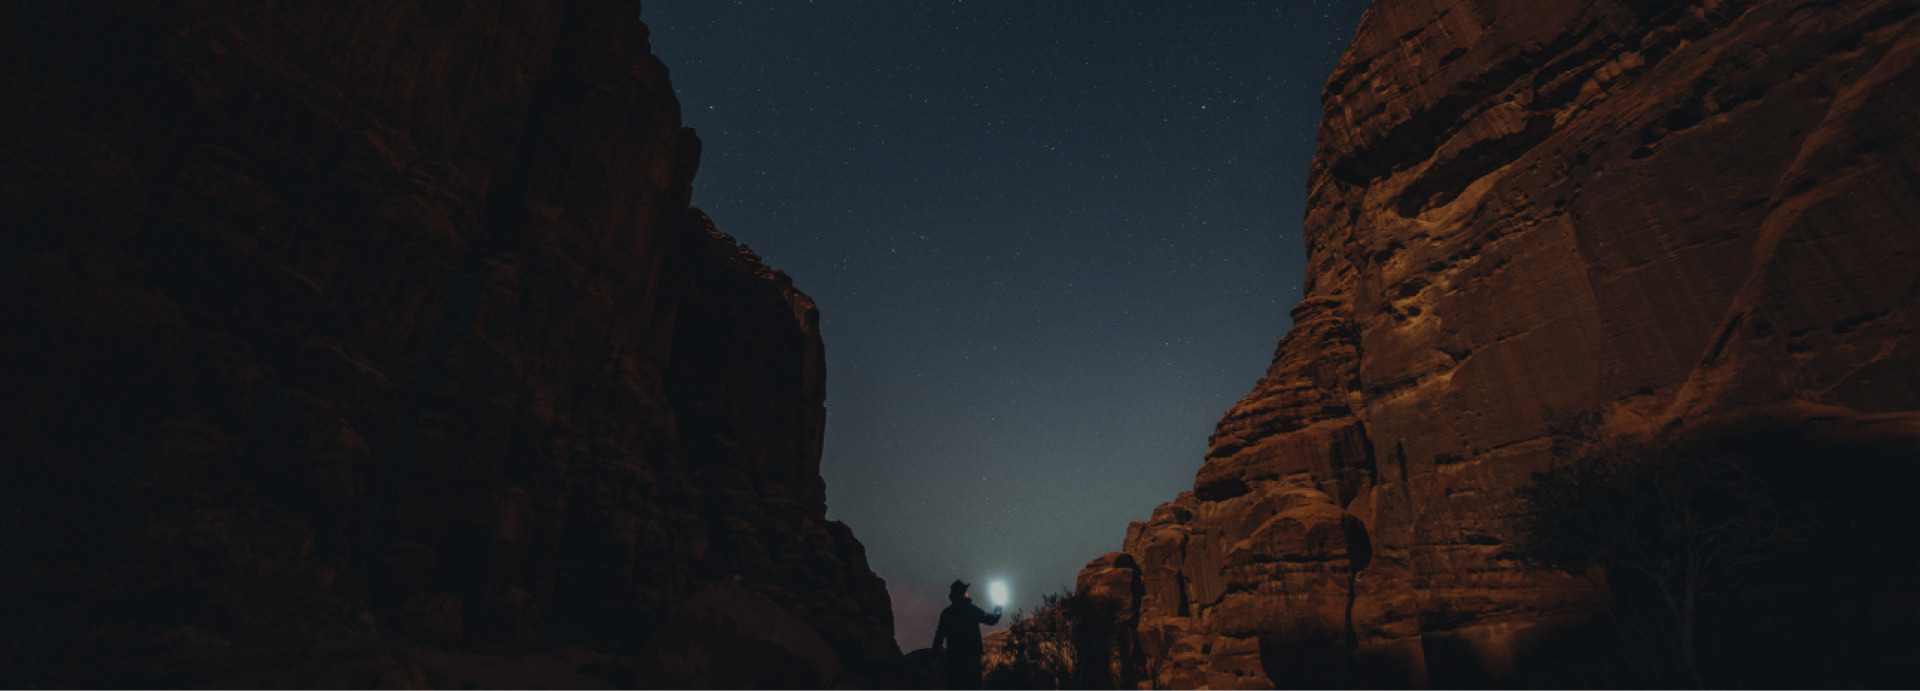 NEOM's mountains and nature at night